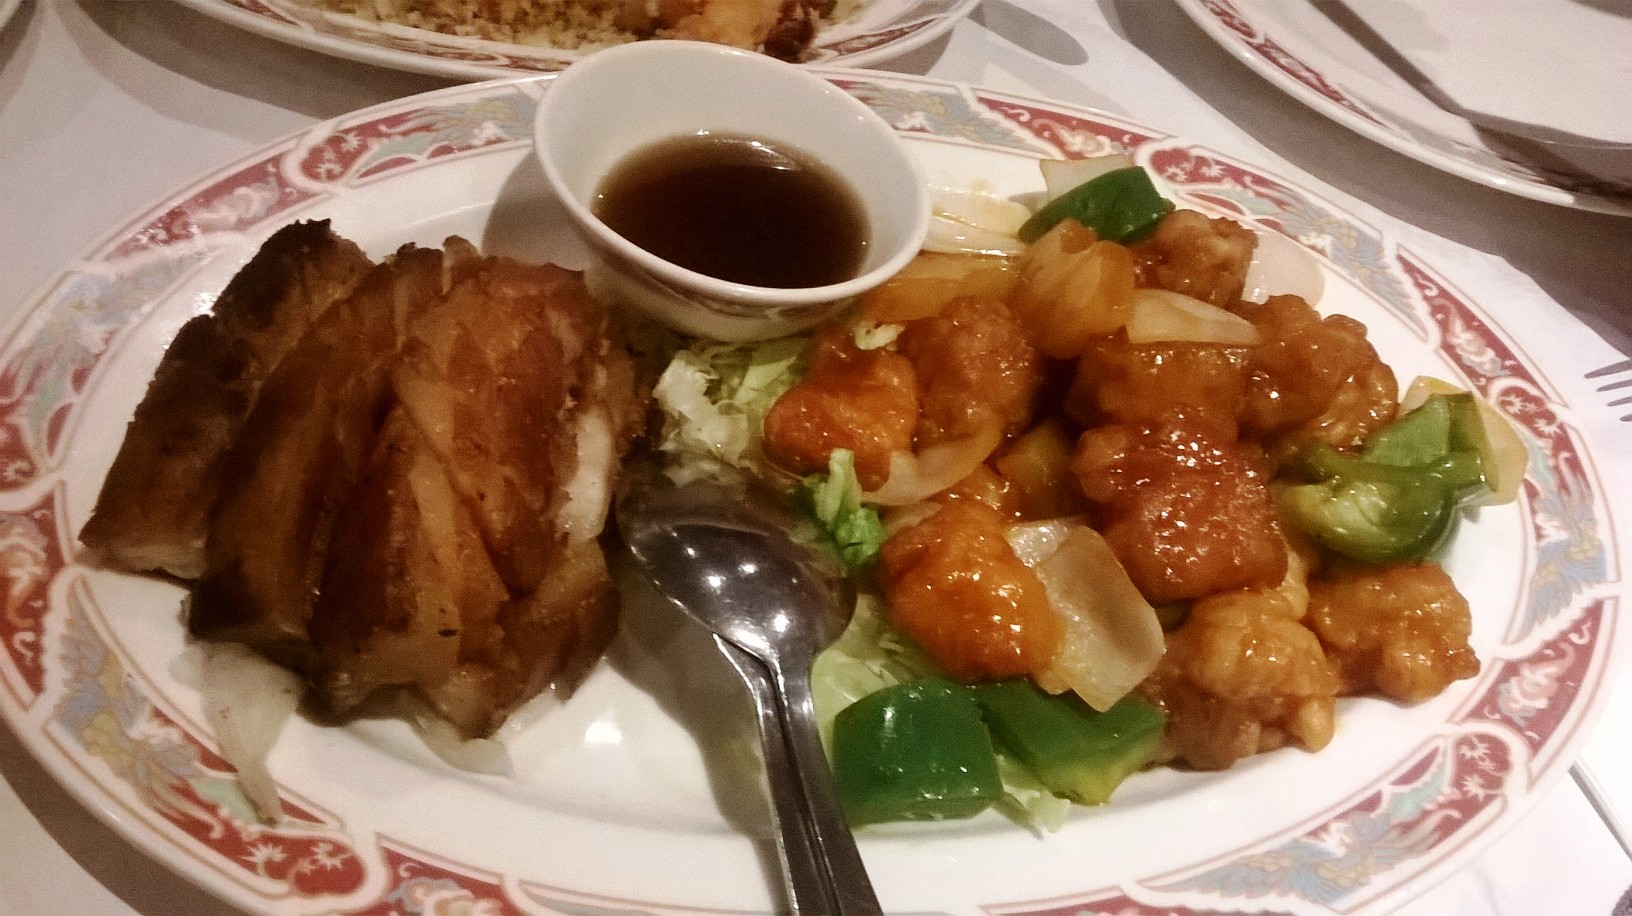 Tai Wu - pork belly and sweet and sour pork